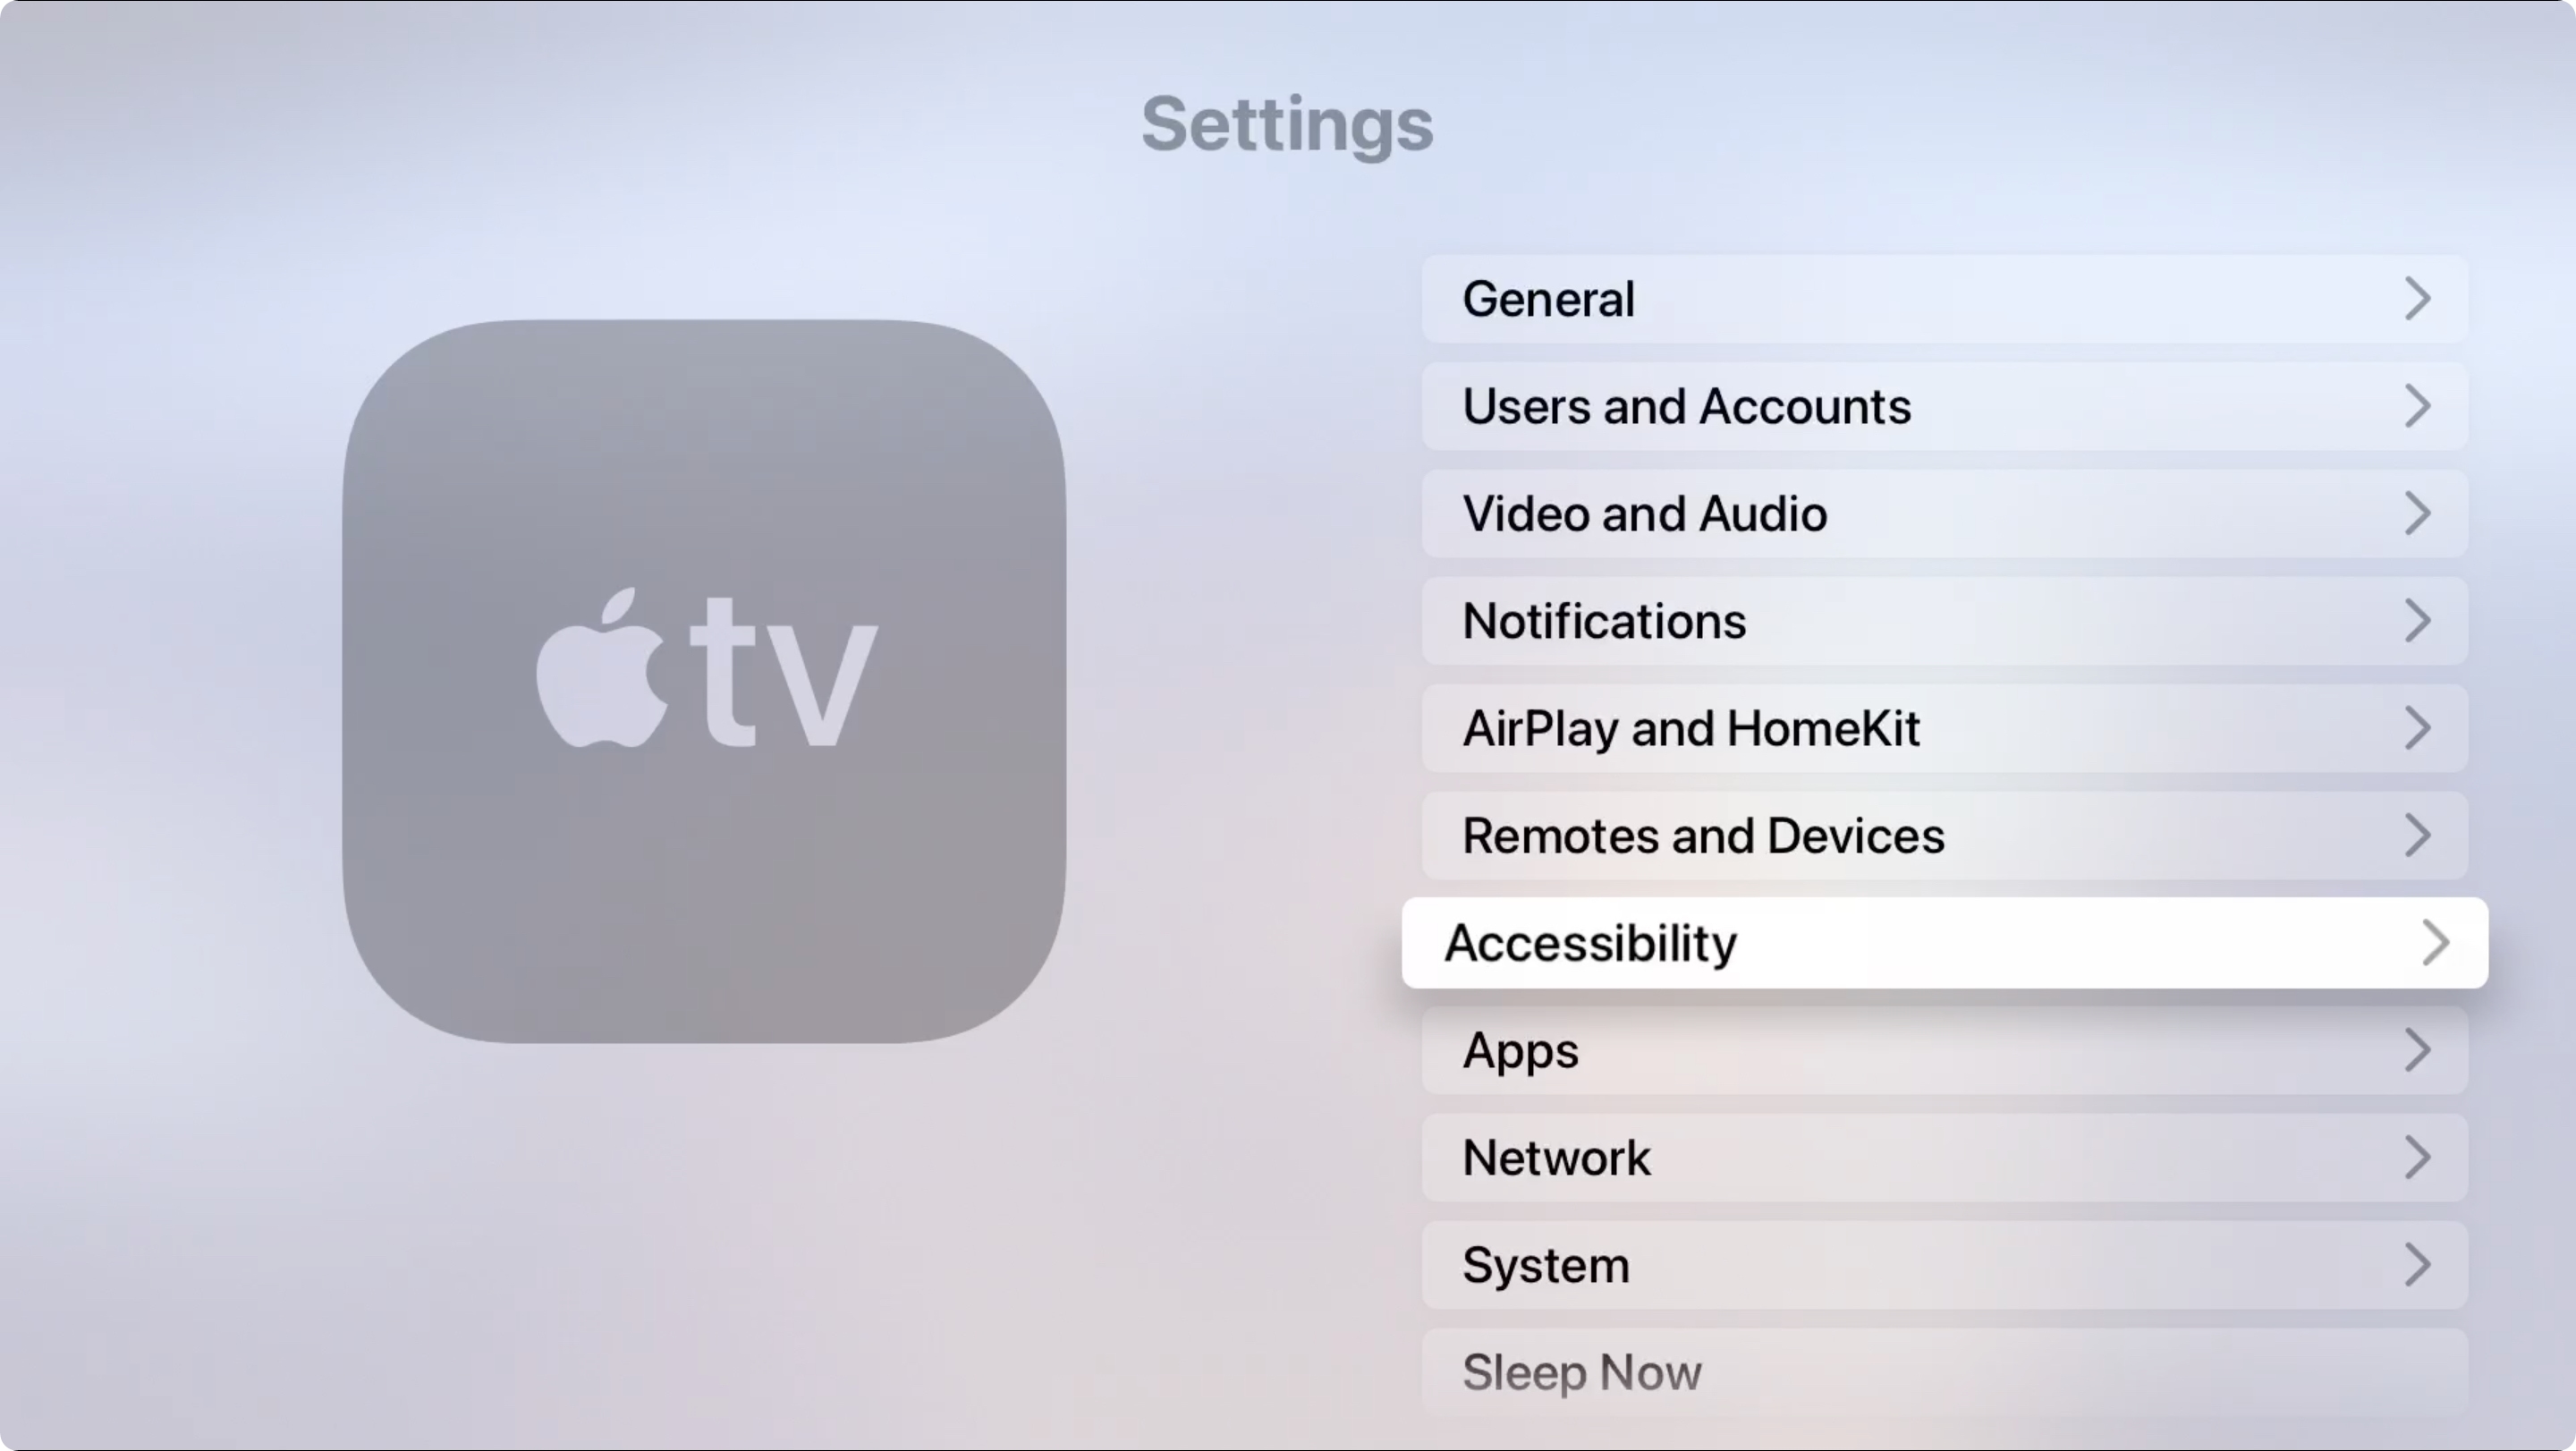 Go to the Settings menu on your device.
Select System.